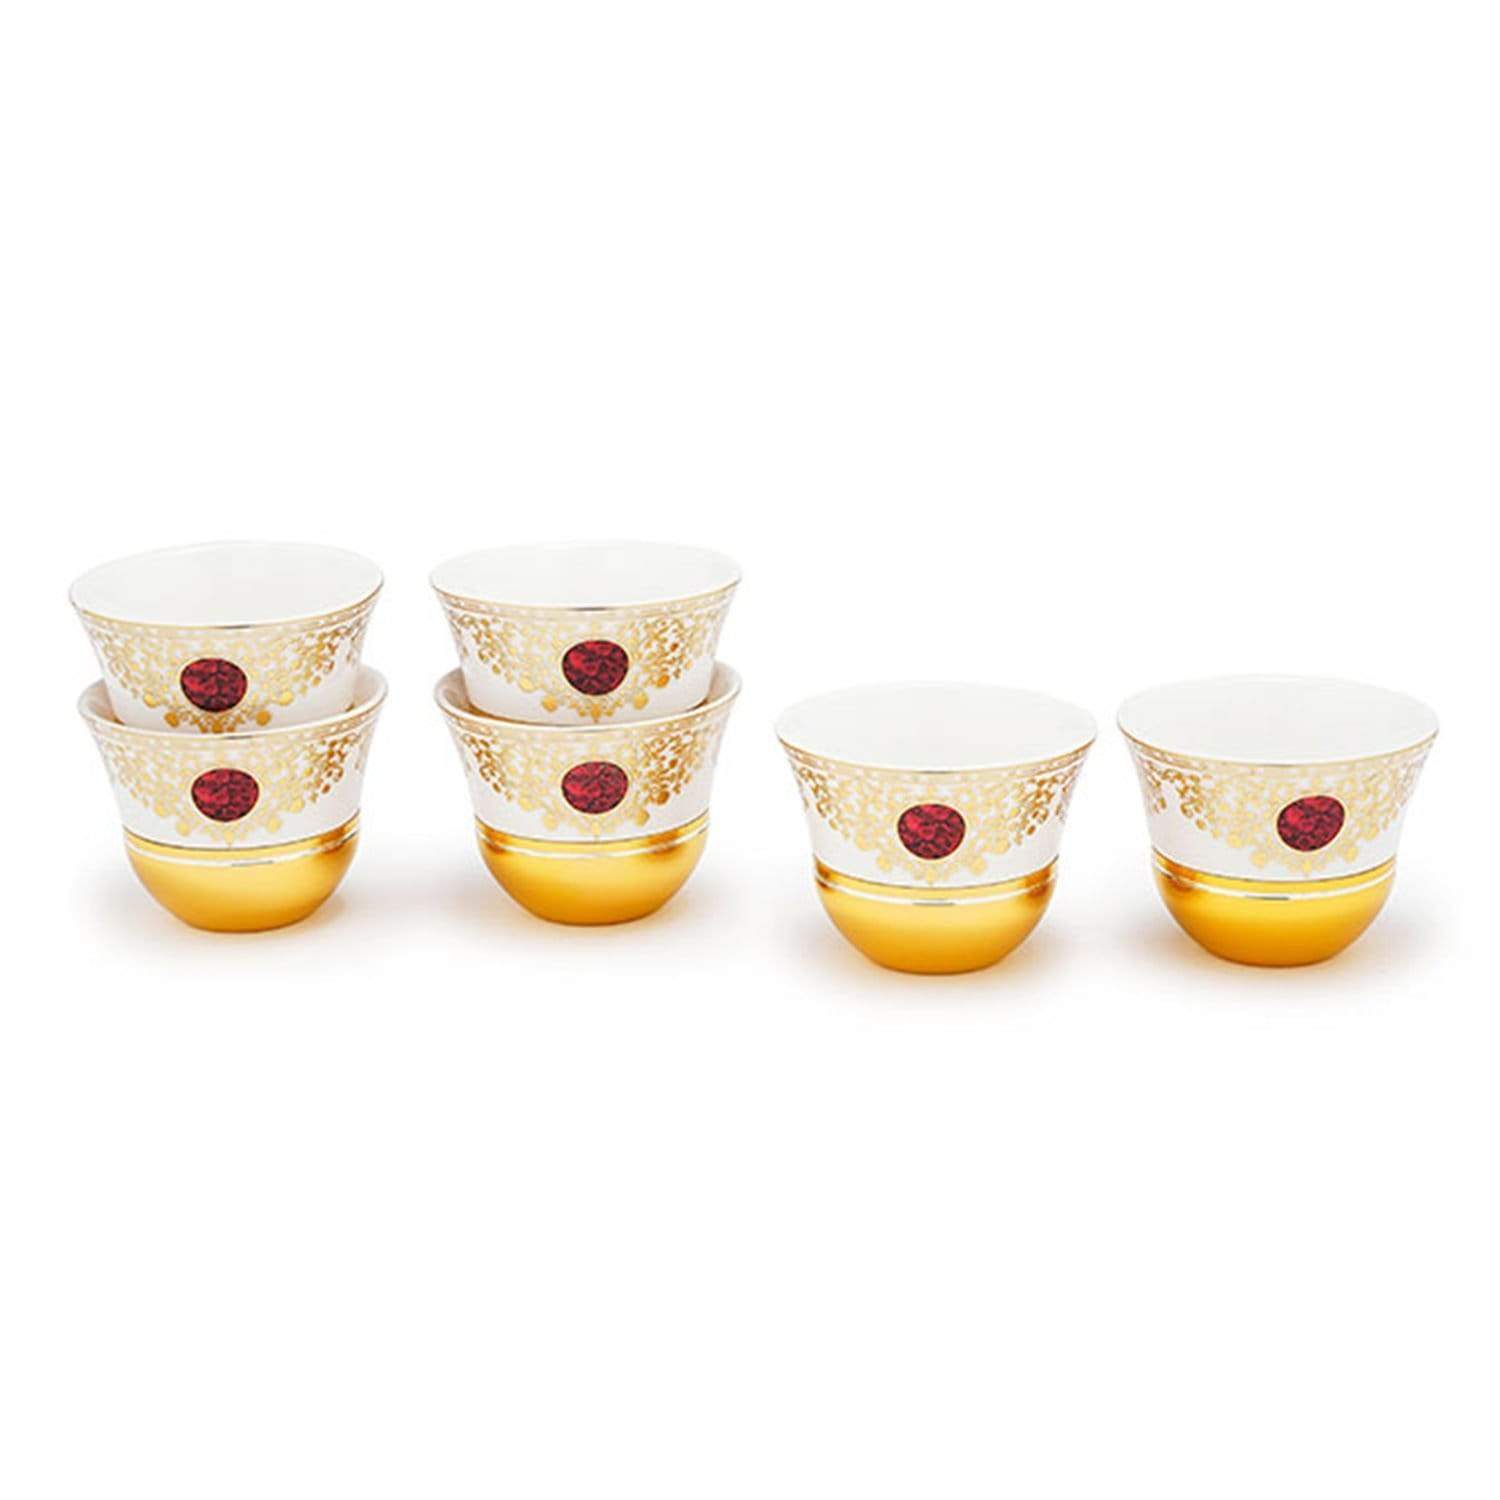 Amber Marjani Cawa Cup - Red and Gold, Set of 6 - AM3373-S28/028/6PC - Jashanmal Home